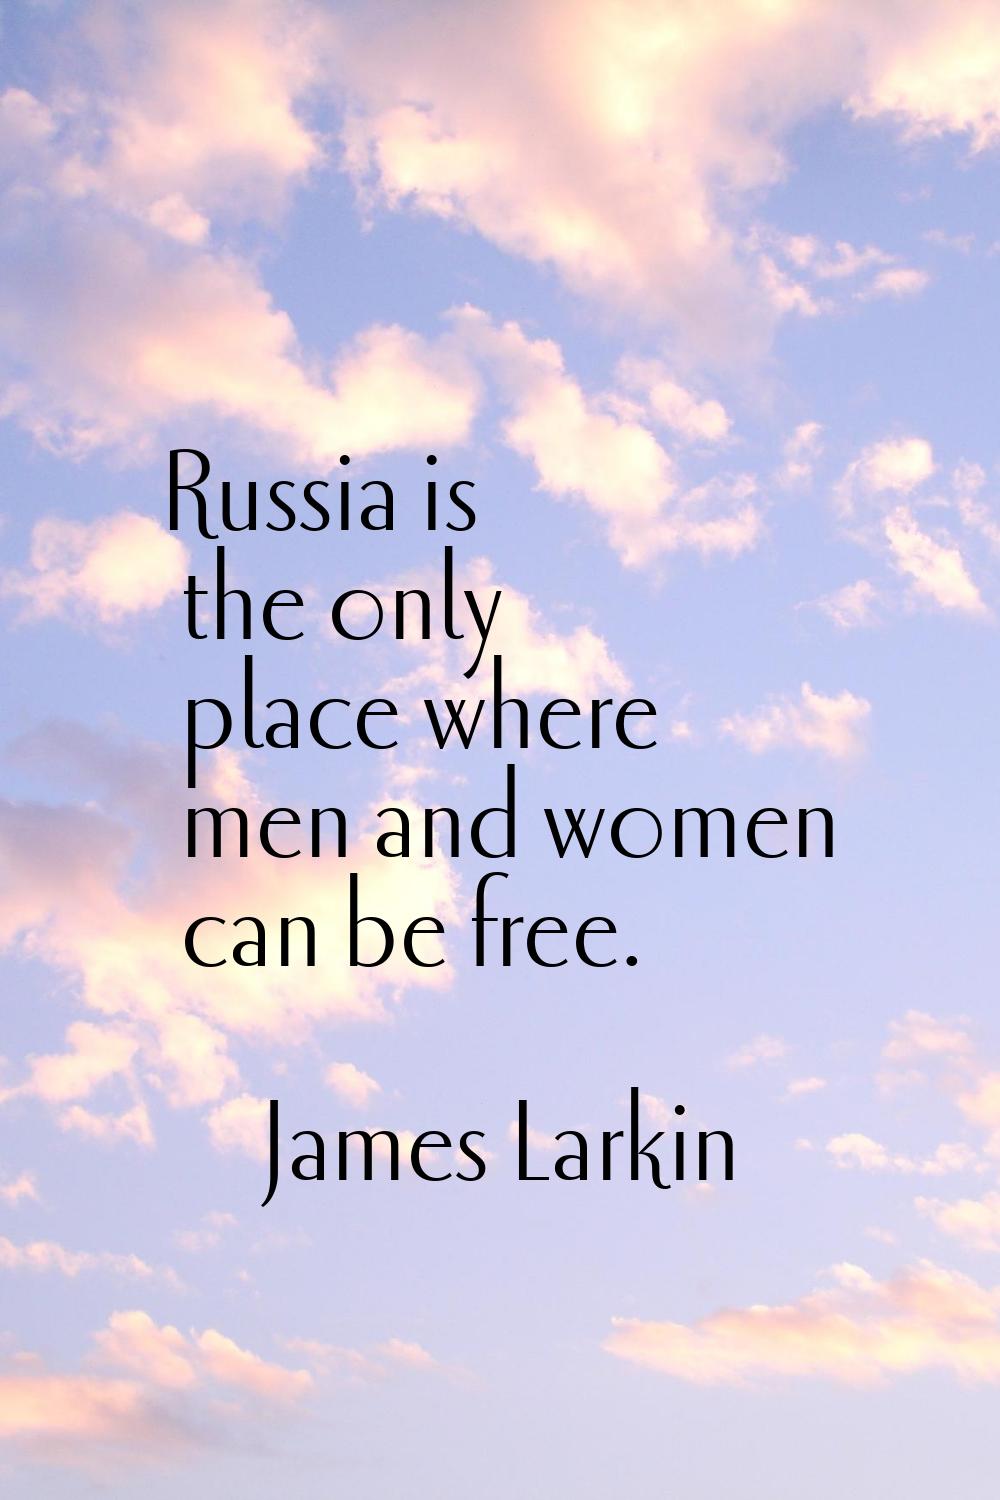 Russia is the only place where men and women can be free.